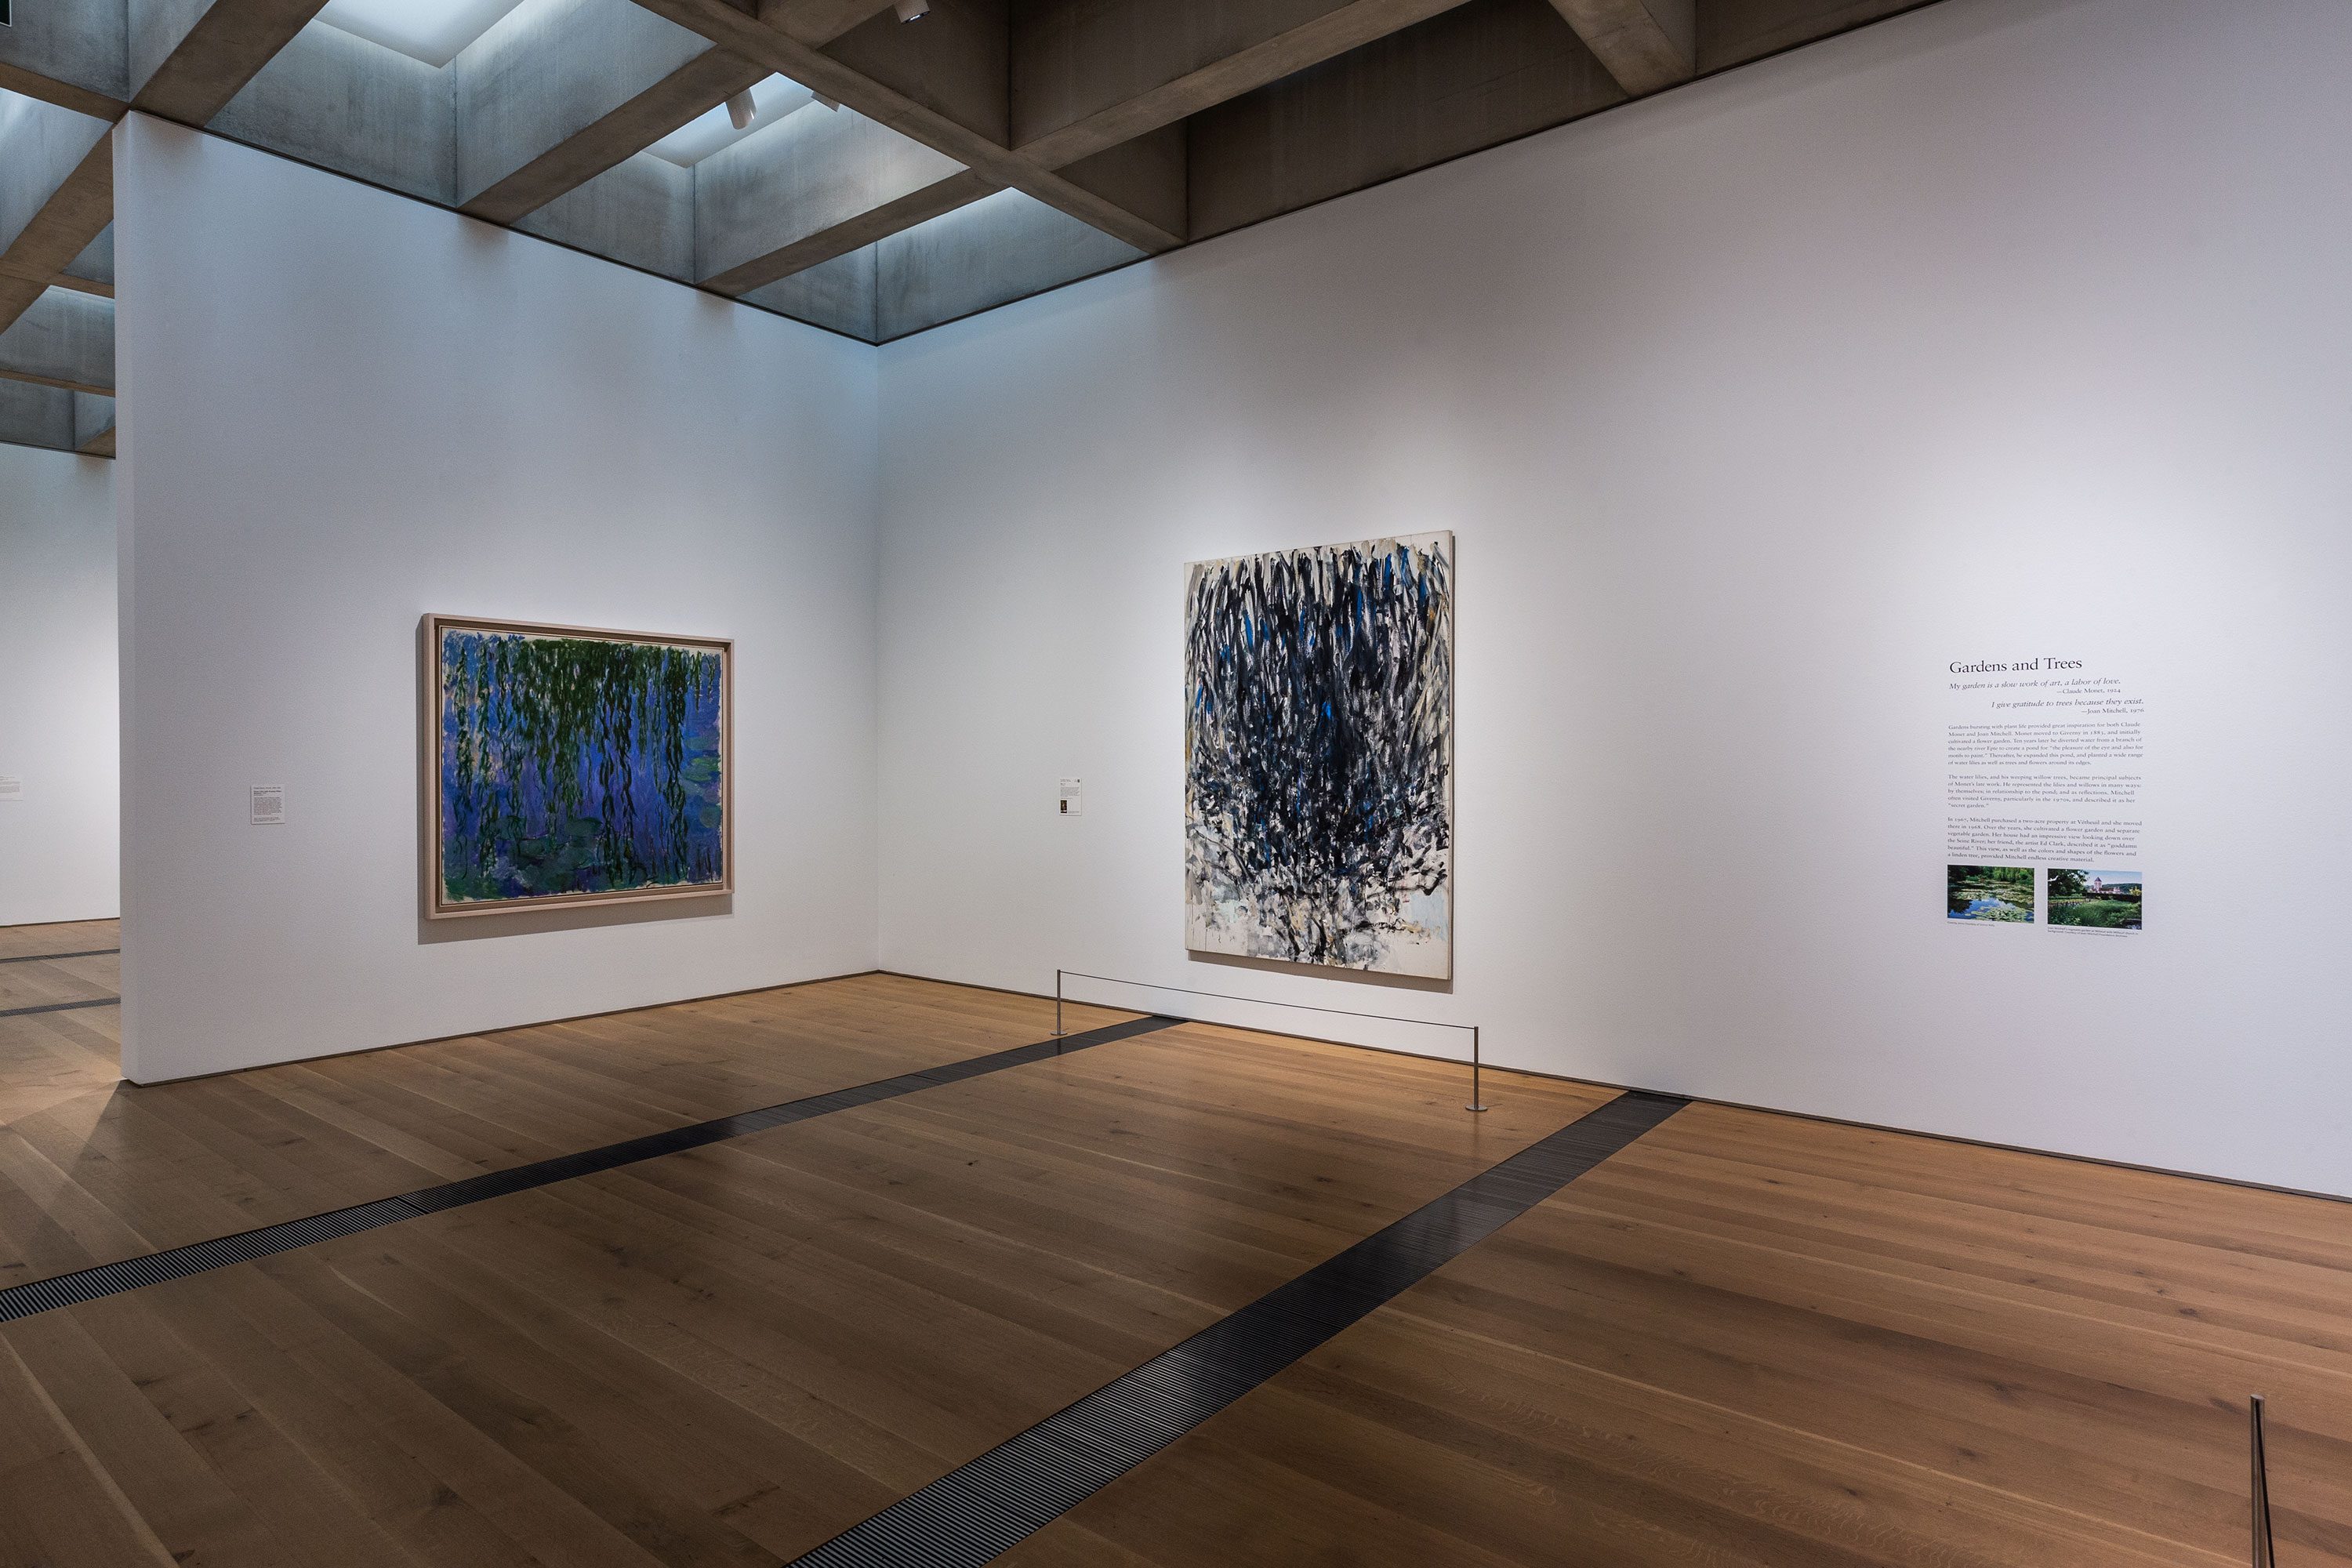 Joan Mitchell reflects Monet's waterlilies in Bois de Boulogne and Barcelo  uses Grisaille in Pantin